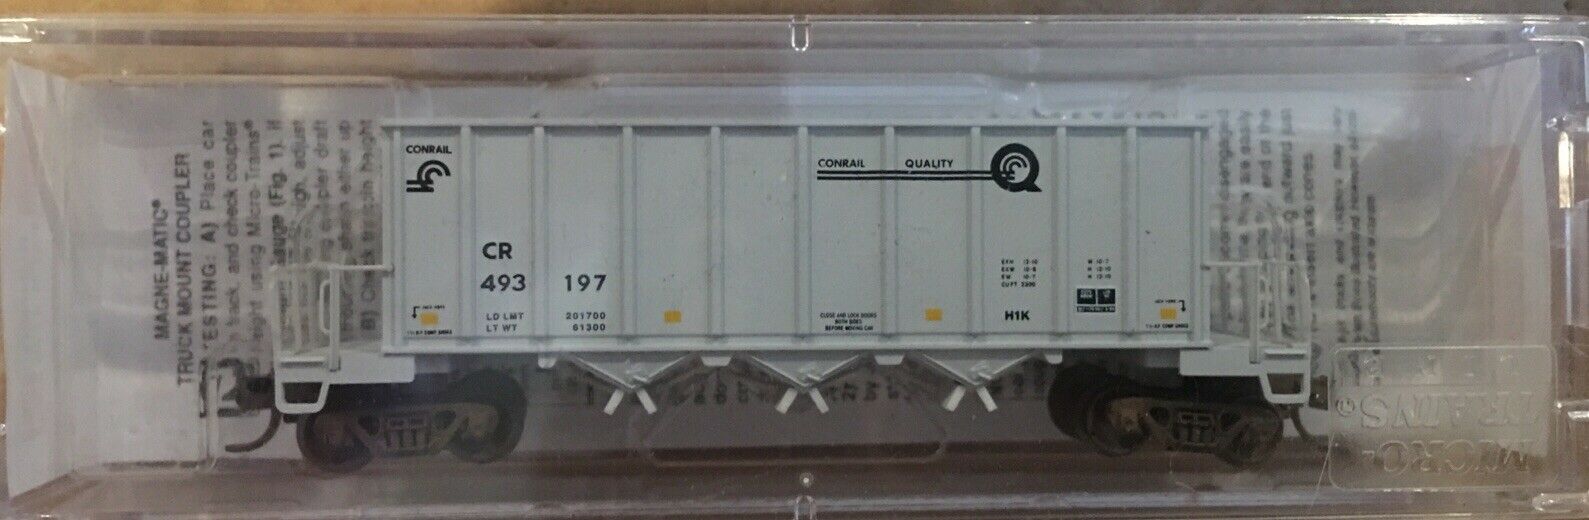 N Scale - Micro-Trains - 125 54 030 - Open Hopper, 3-Bay Ortner Rapid Discharge - Conrail - 493197